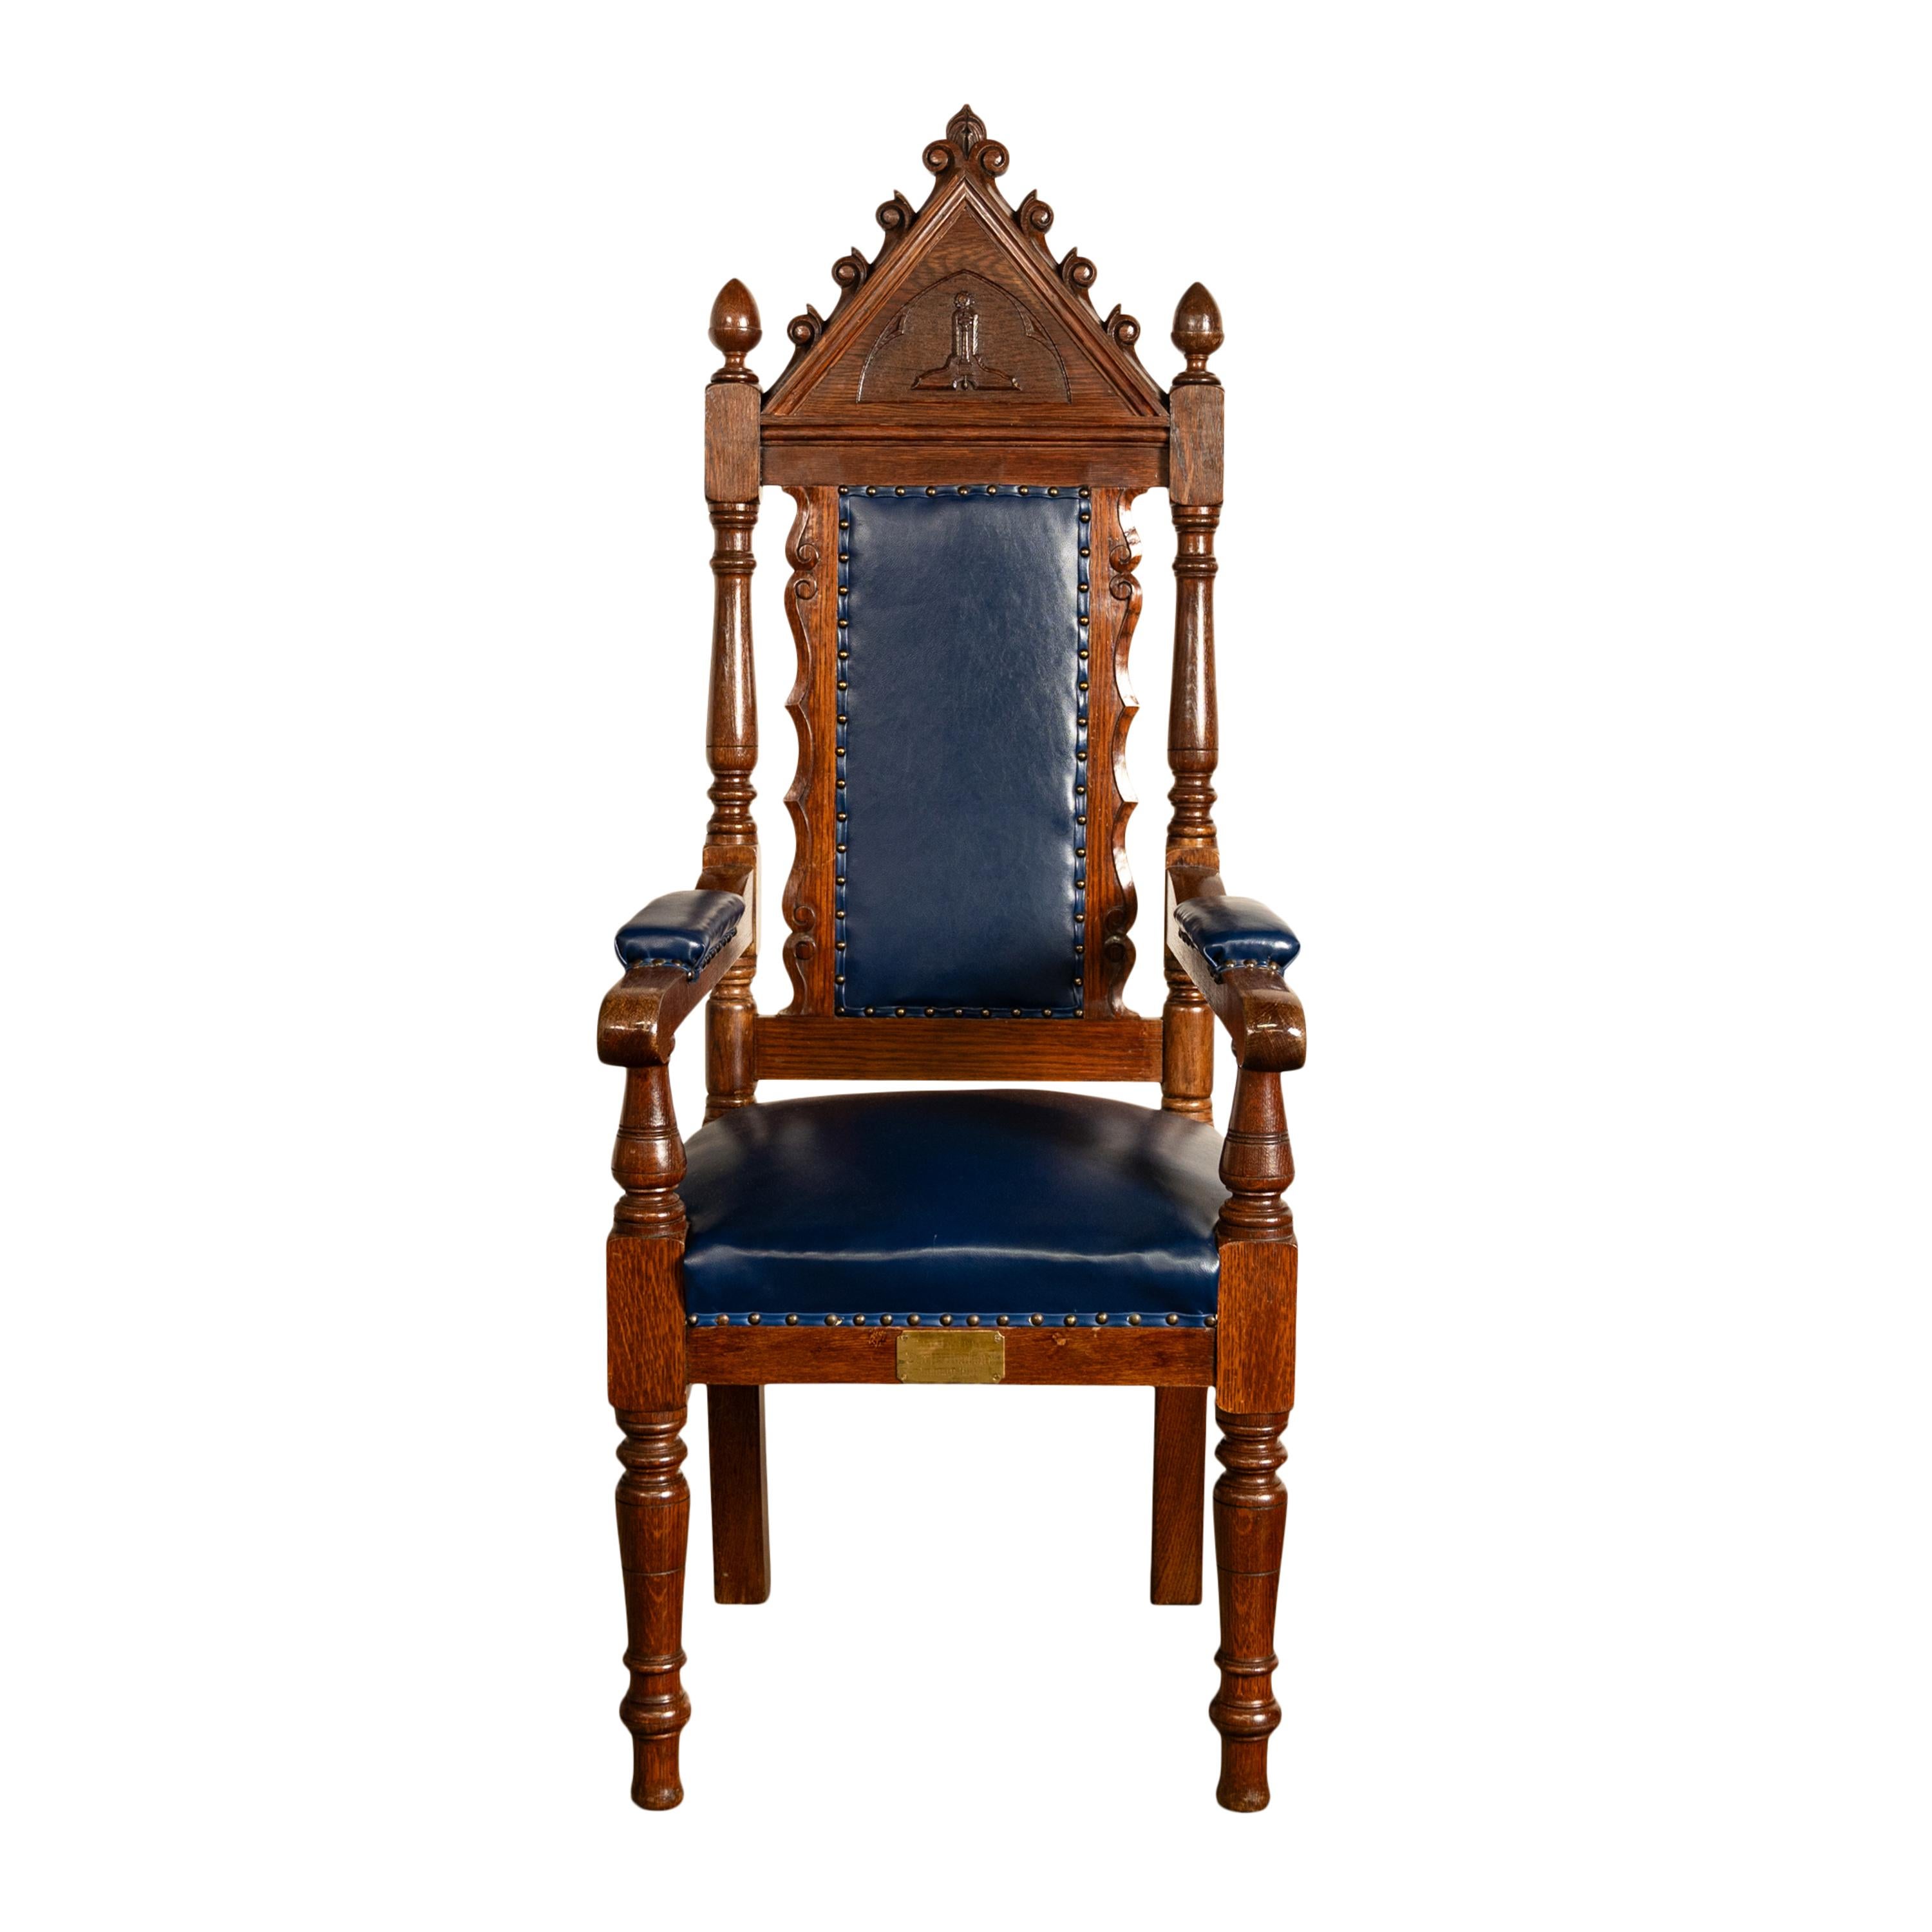 Antique Set of 5 Gothic Revival Irish Masonic Oak & Leather Throne Chairs 1900 In Good Condition For Sale In Portland, OR